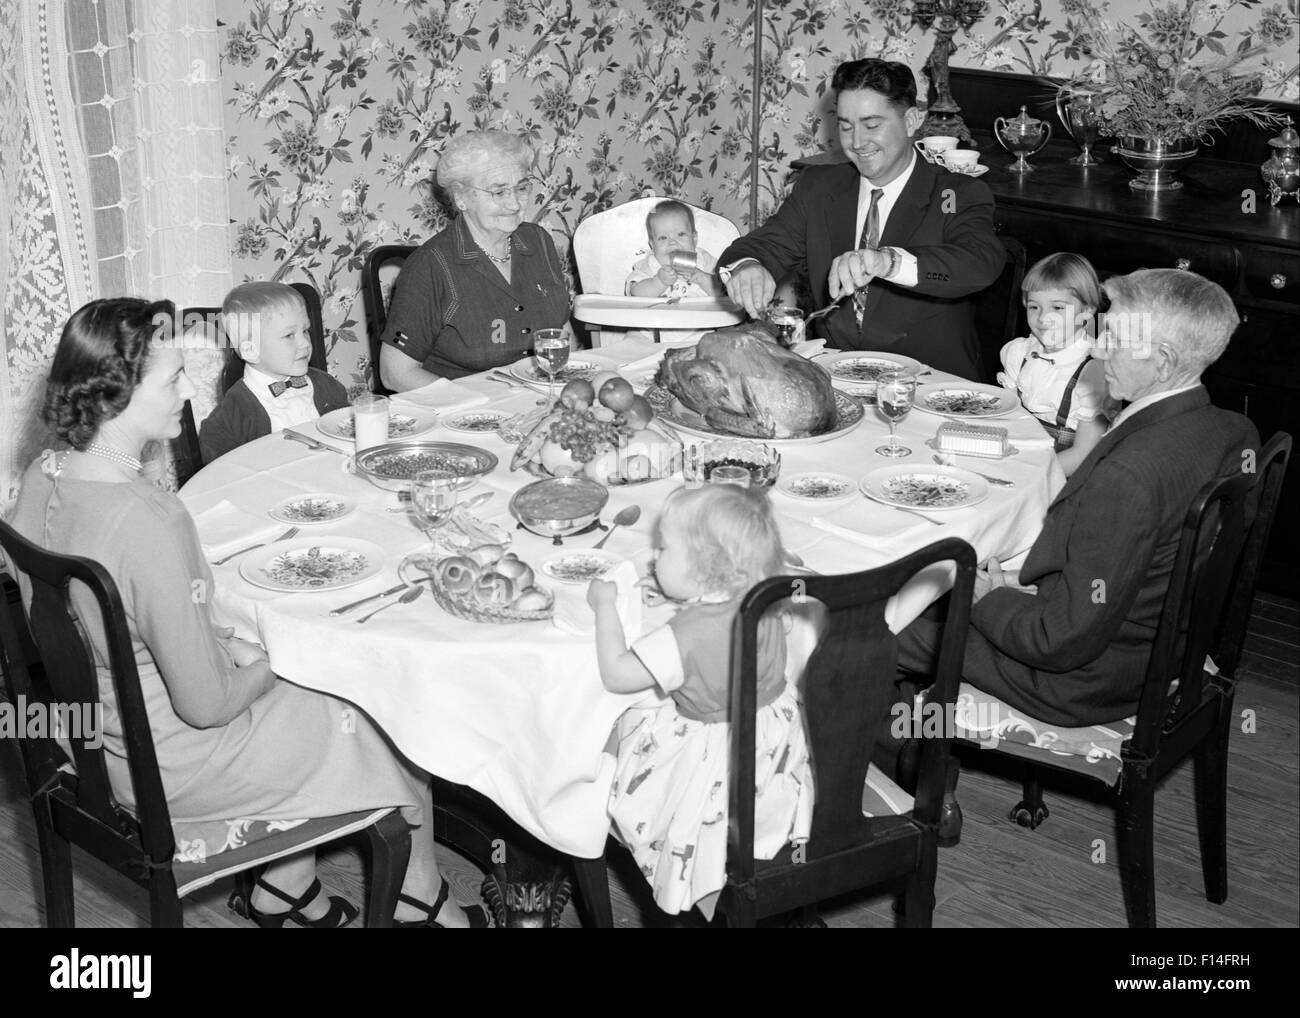 1950s THREE GENERATION FAMILY HAVING THANKSGIVING HOLIDAY MEAL IN DINING ROOM FATHER CARVING TURKEY Stock Photo